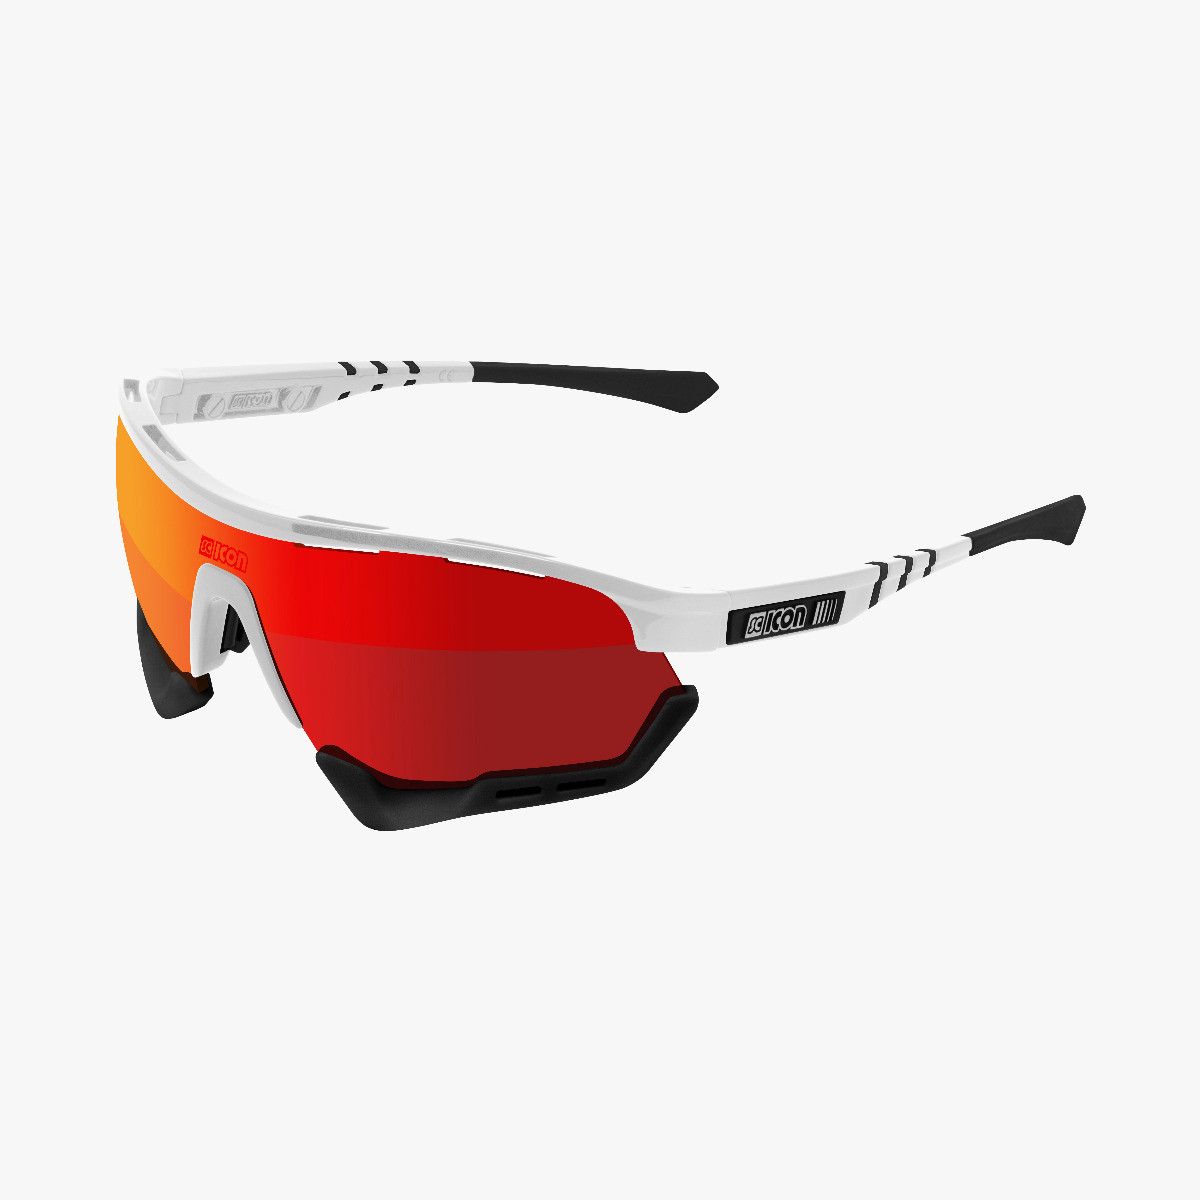 Scicon Sports | Aerotech Sport Cycling Performance Sunglasses - White / Red - EY13060403
